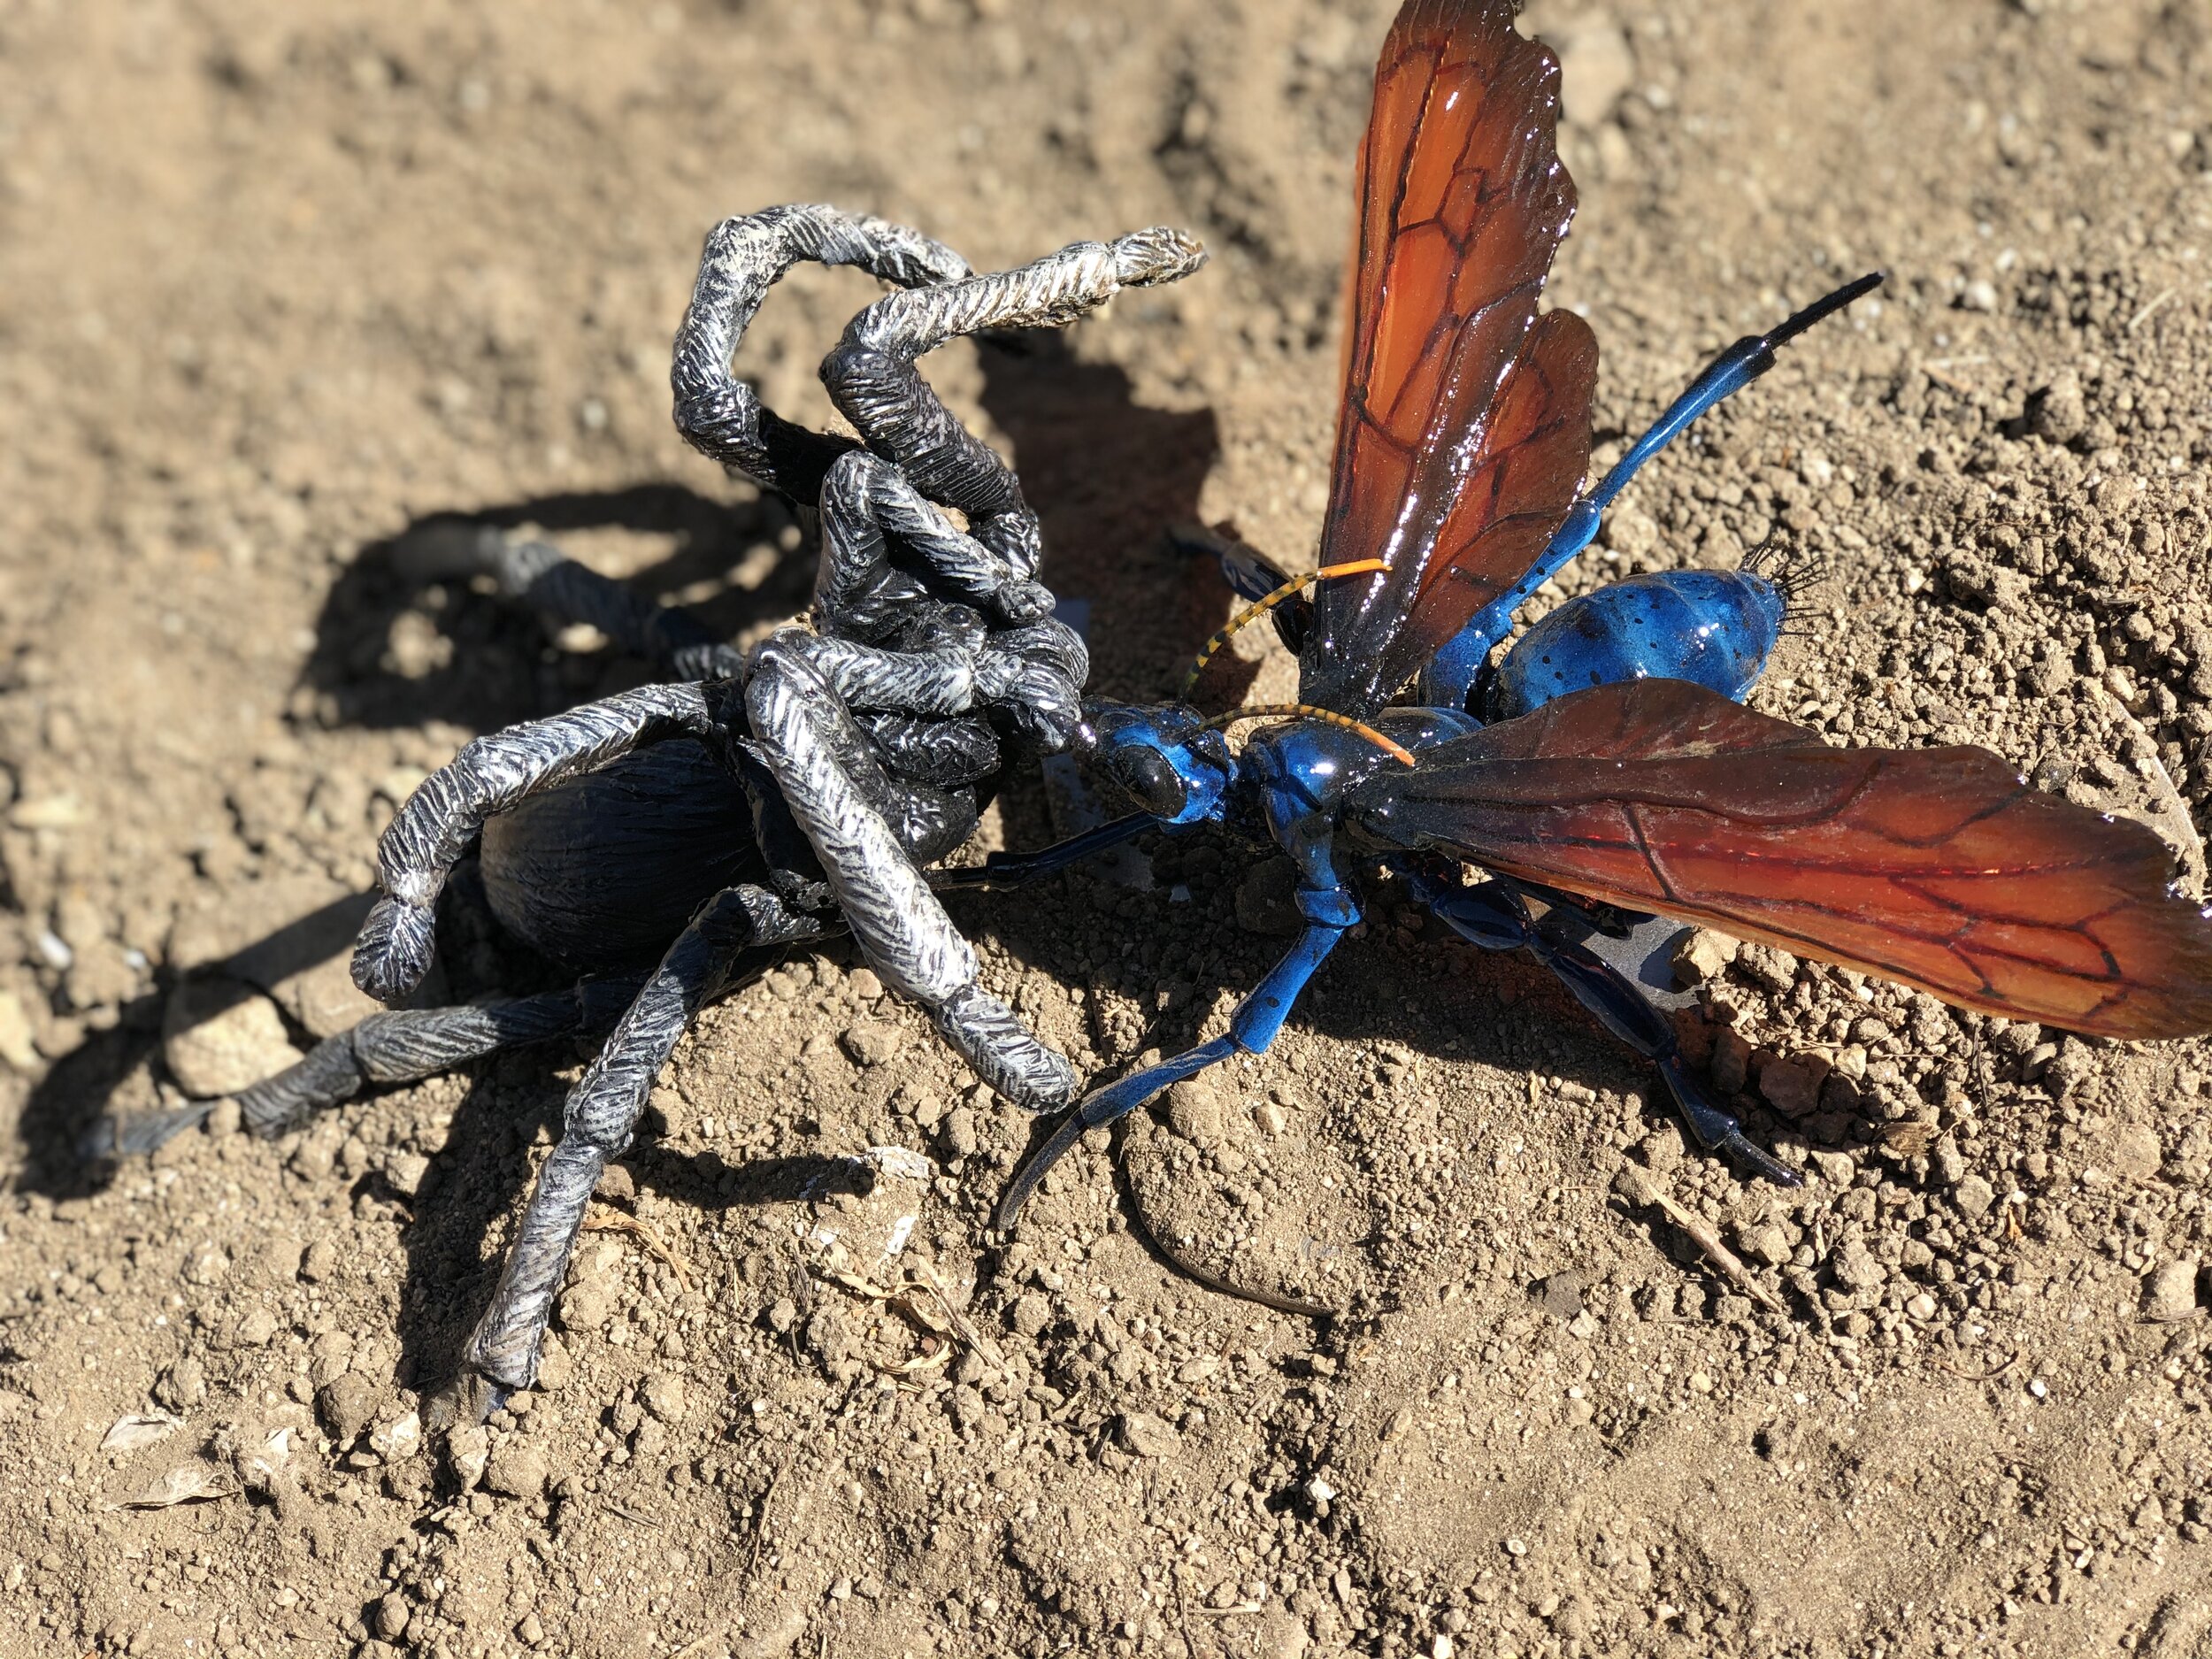  Stage two of a battle between Tarantula Hawk Wasp and Tarantula for Aliso Woods and Canyon Park Orange County, CA 